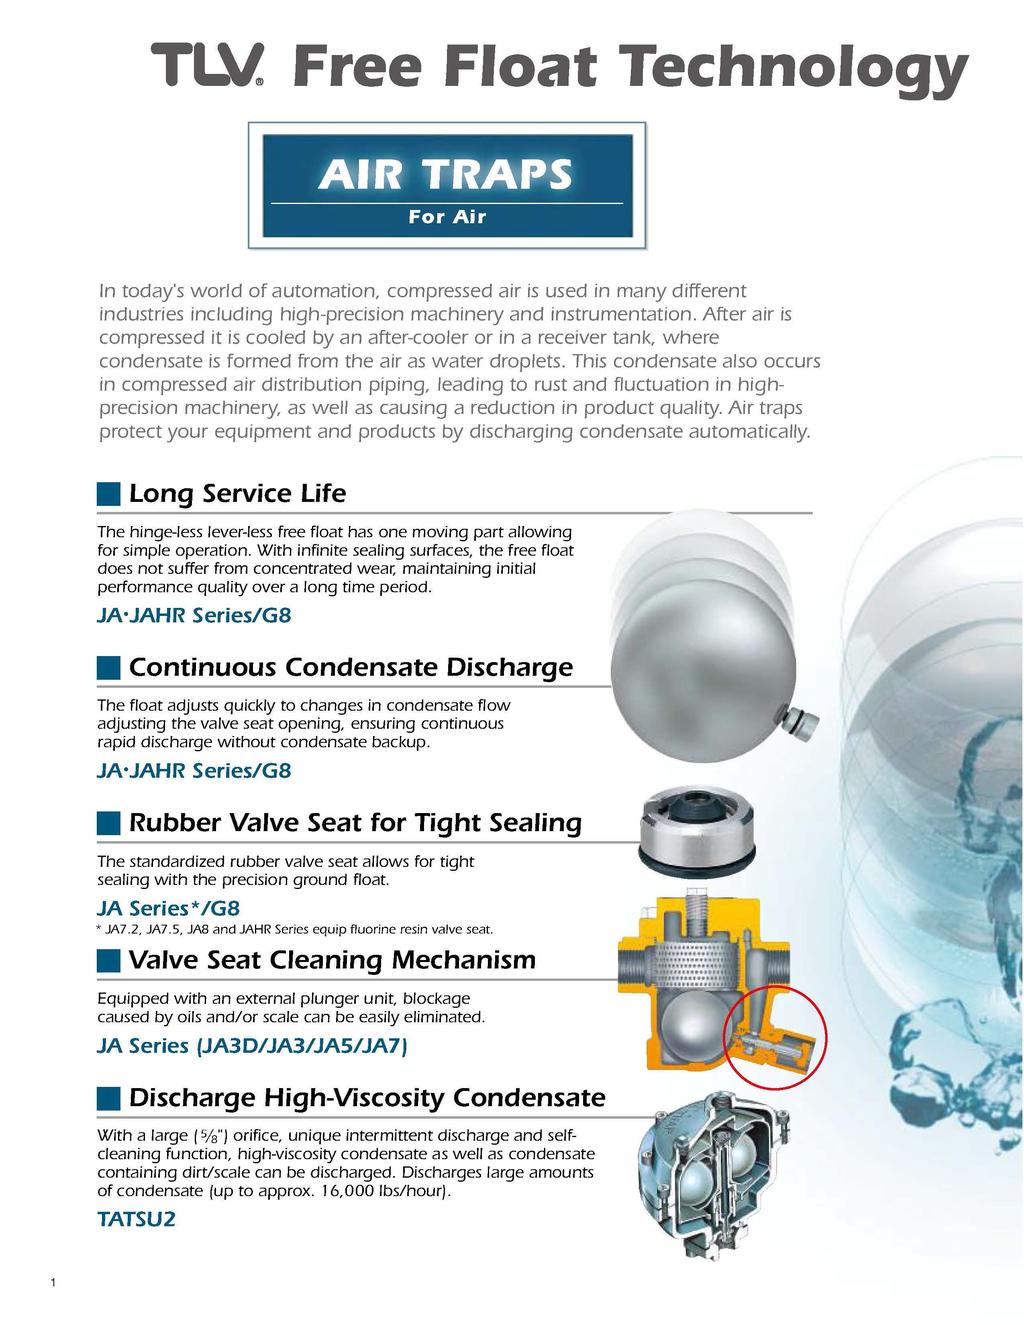 TW. Free Float Technology n todays world of automation, compressed air is used in many different industries including high-precision machinery and instrumentation.